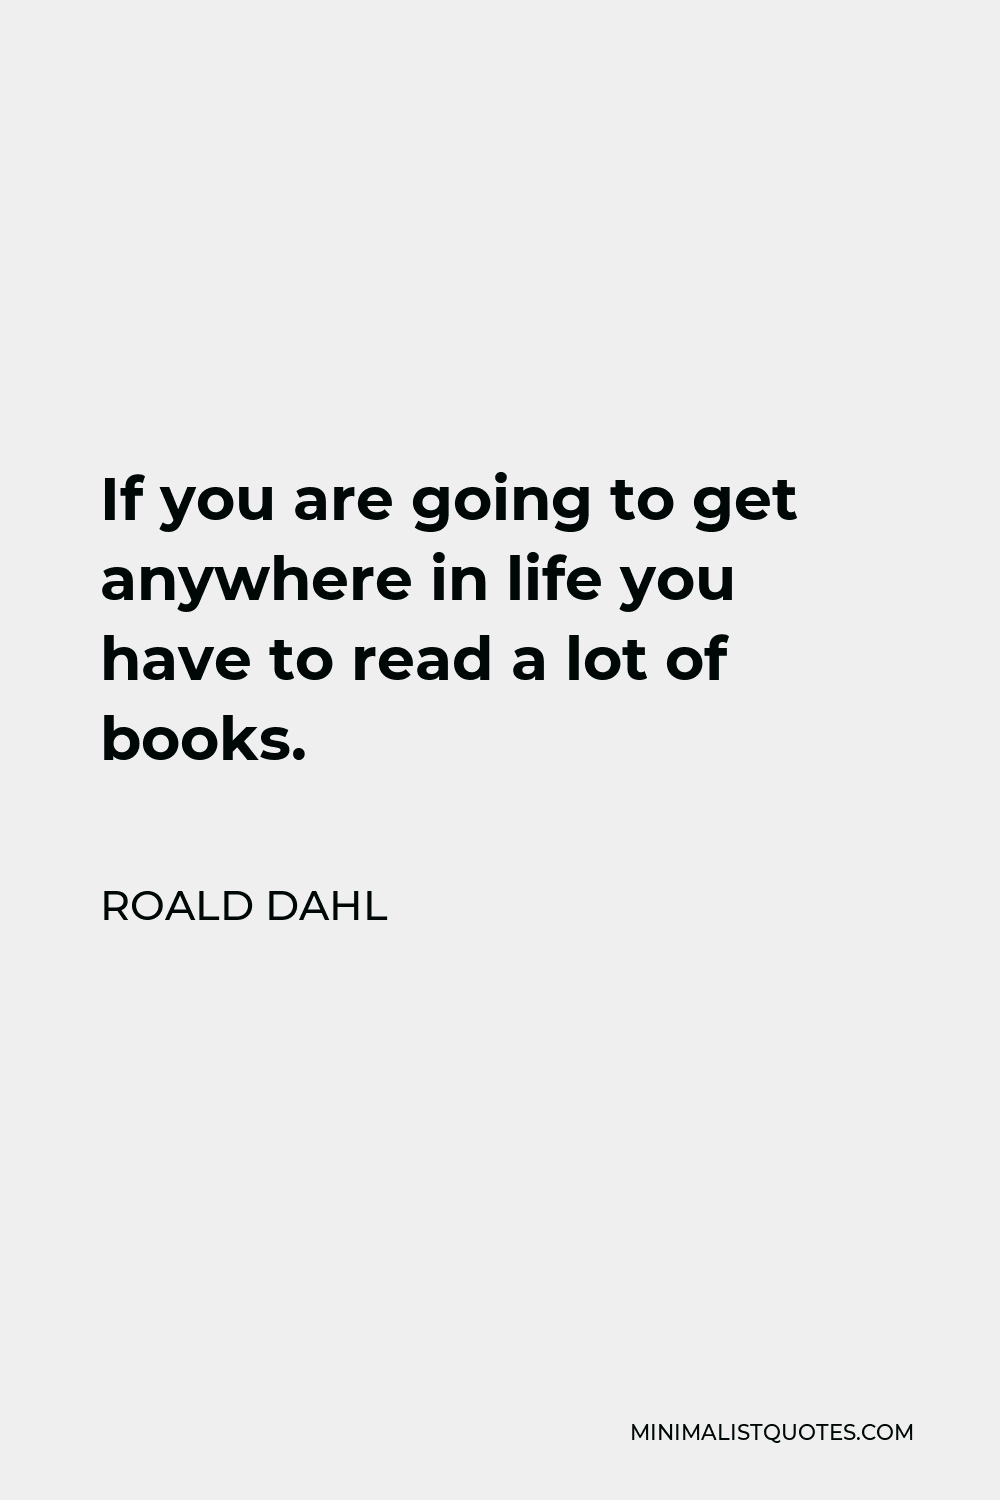 Roald Dahl Quote - If you are going to get anywhere in life you have to read a lot of books.